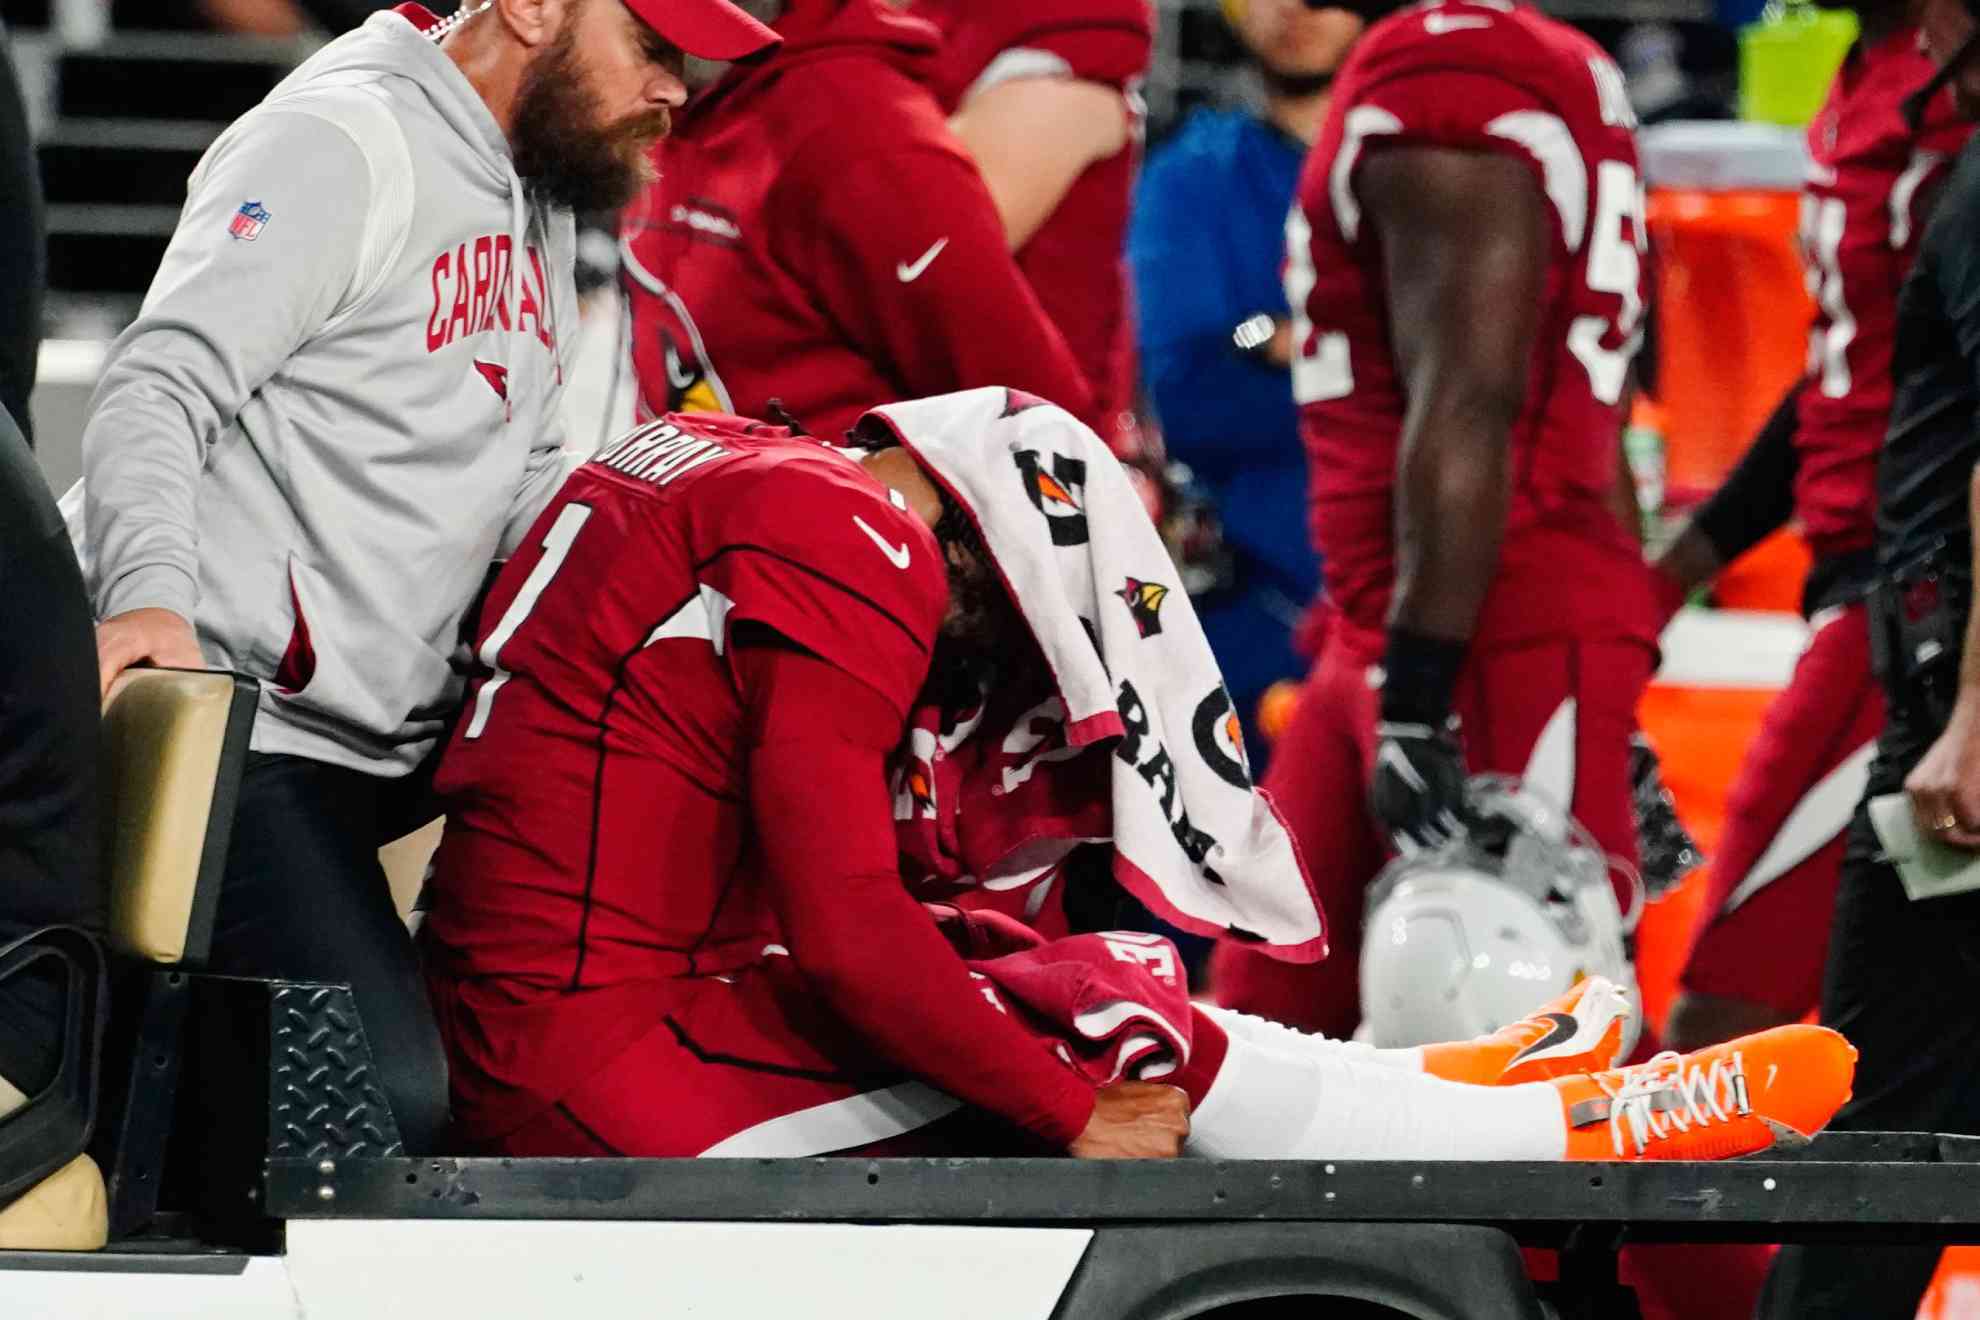 Kyler Murray tears right ACL, sealing nightmare season for